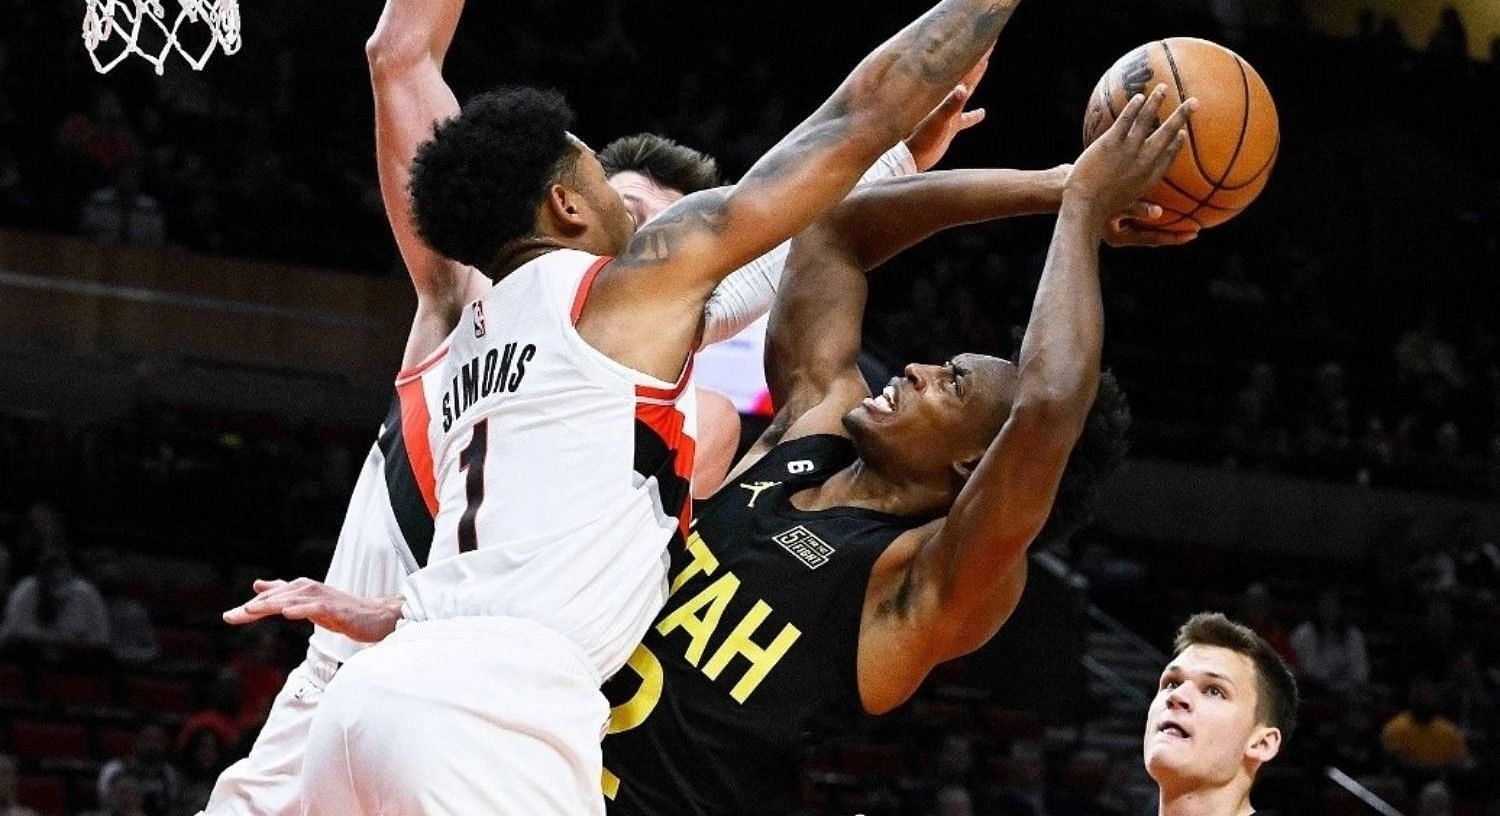 Utah Jazz vs Portland Trail Blazers: Game details, preview, betting tips, prediction and more